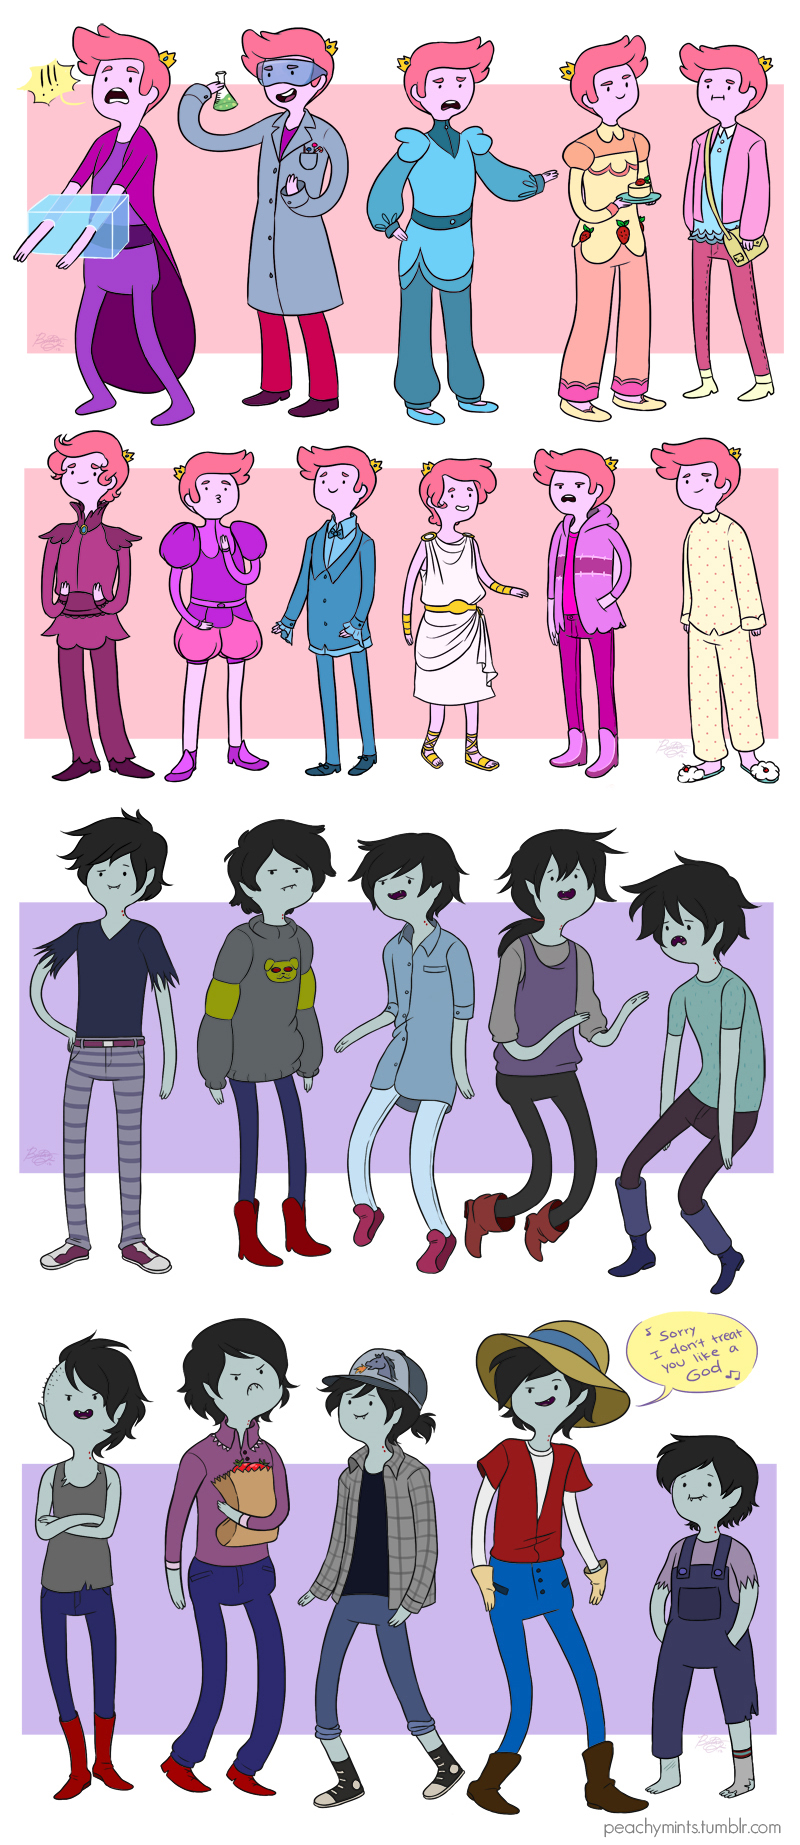 prince gumball and marshall lee's closet - Adventure Time With Finn and  Jake Photo (33435916) - Fanpop